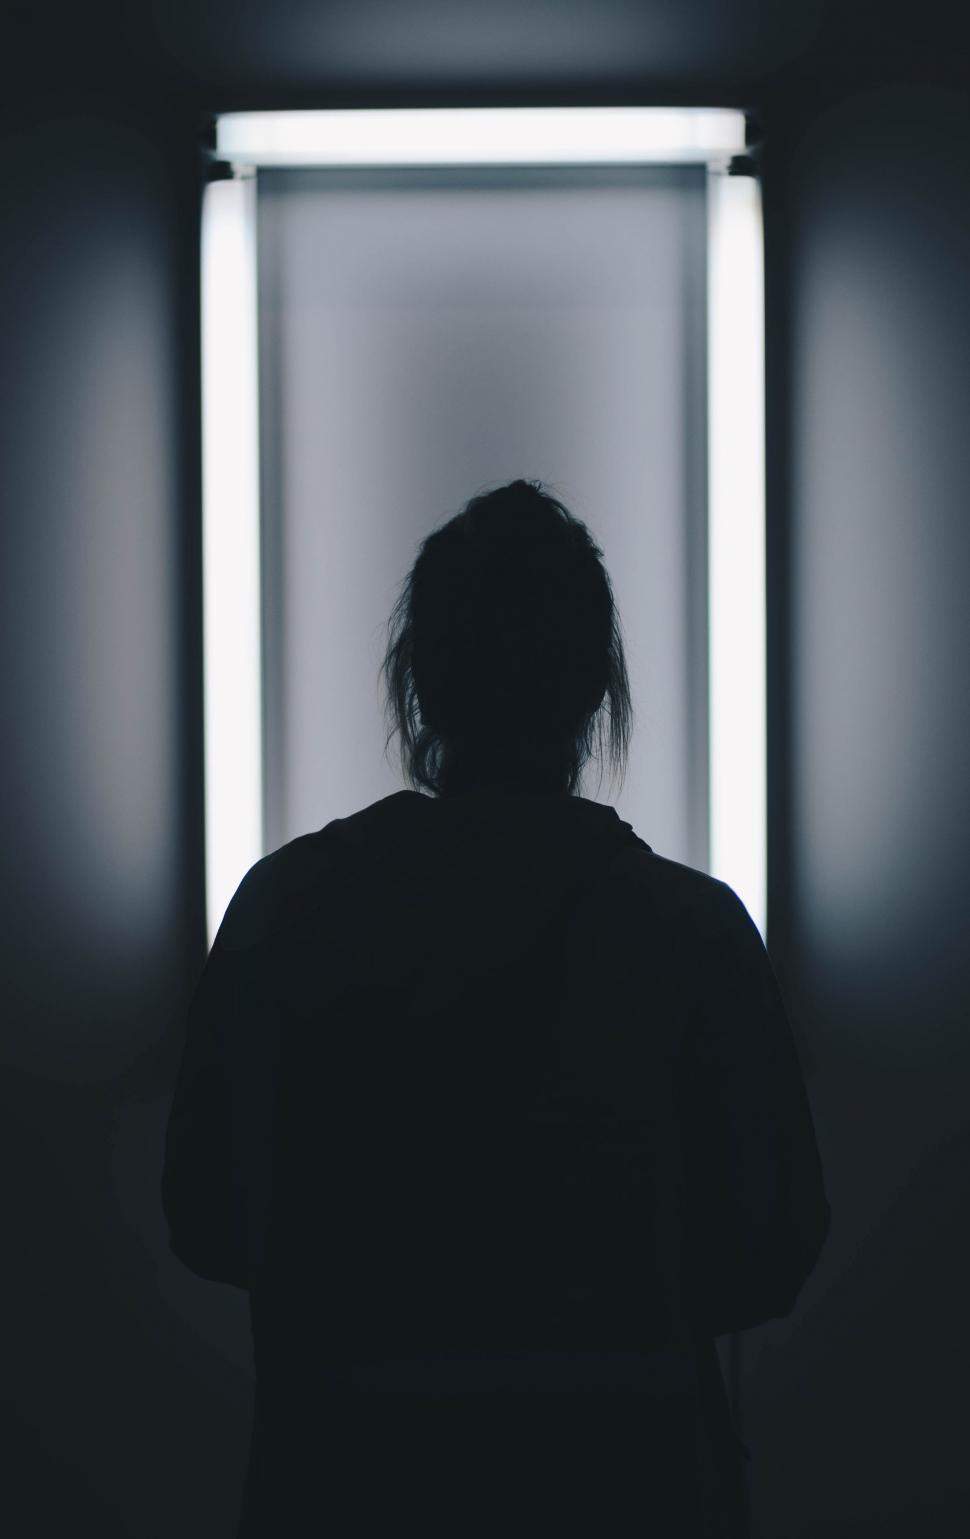 Free Image of Person Standing in Front of Mirror in Dark Room 